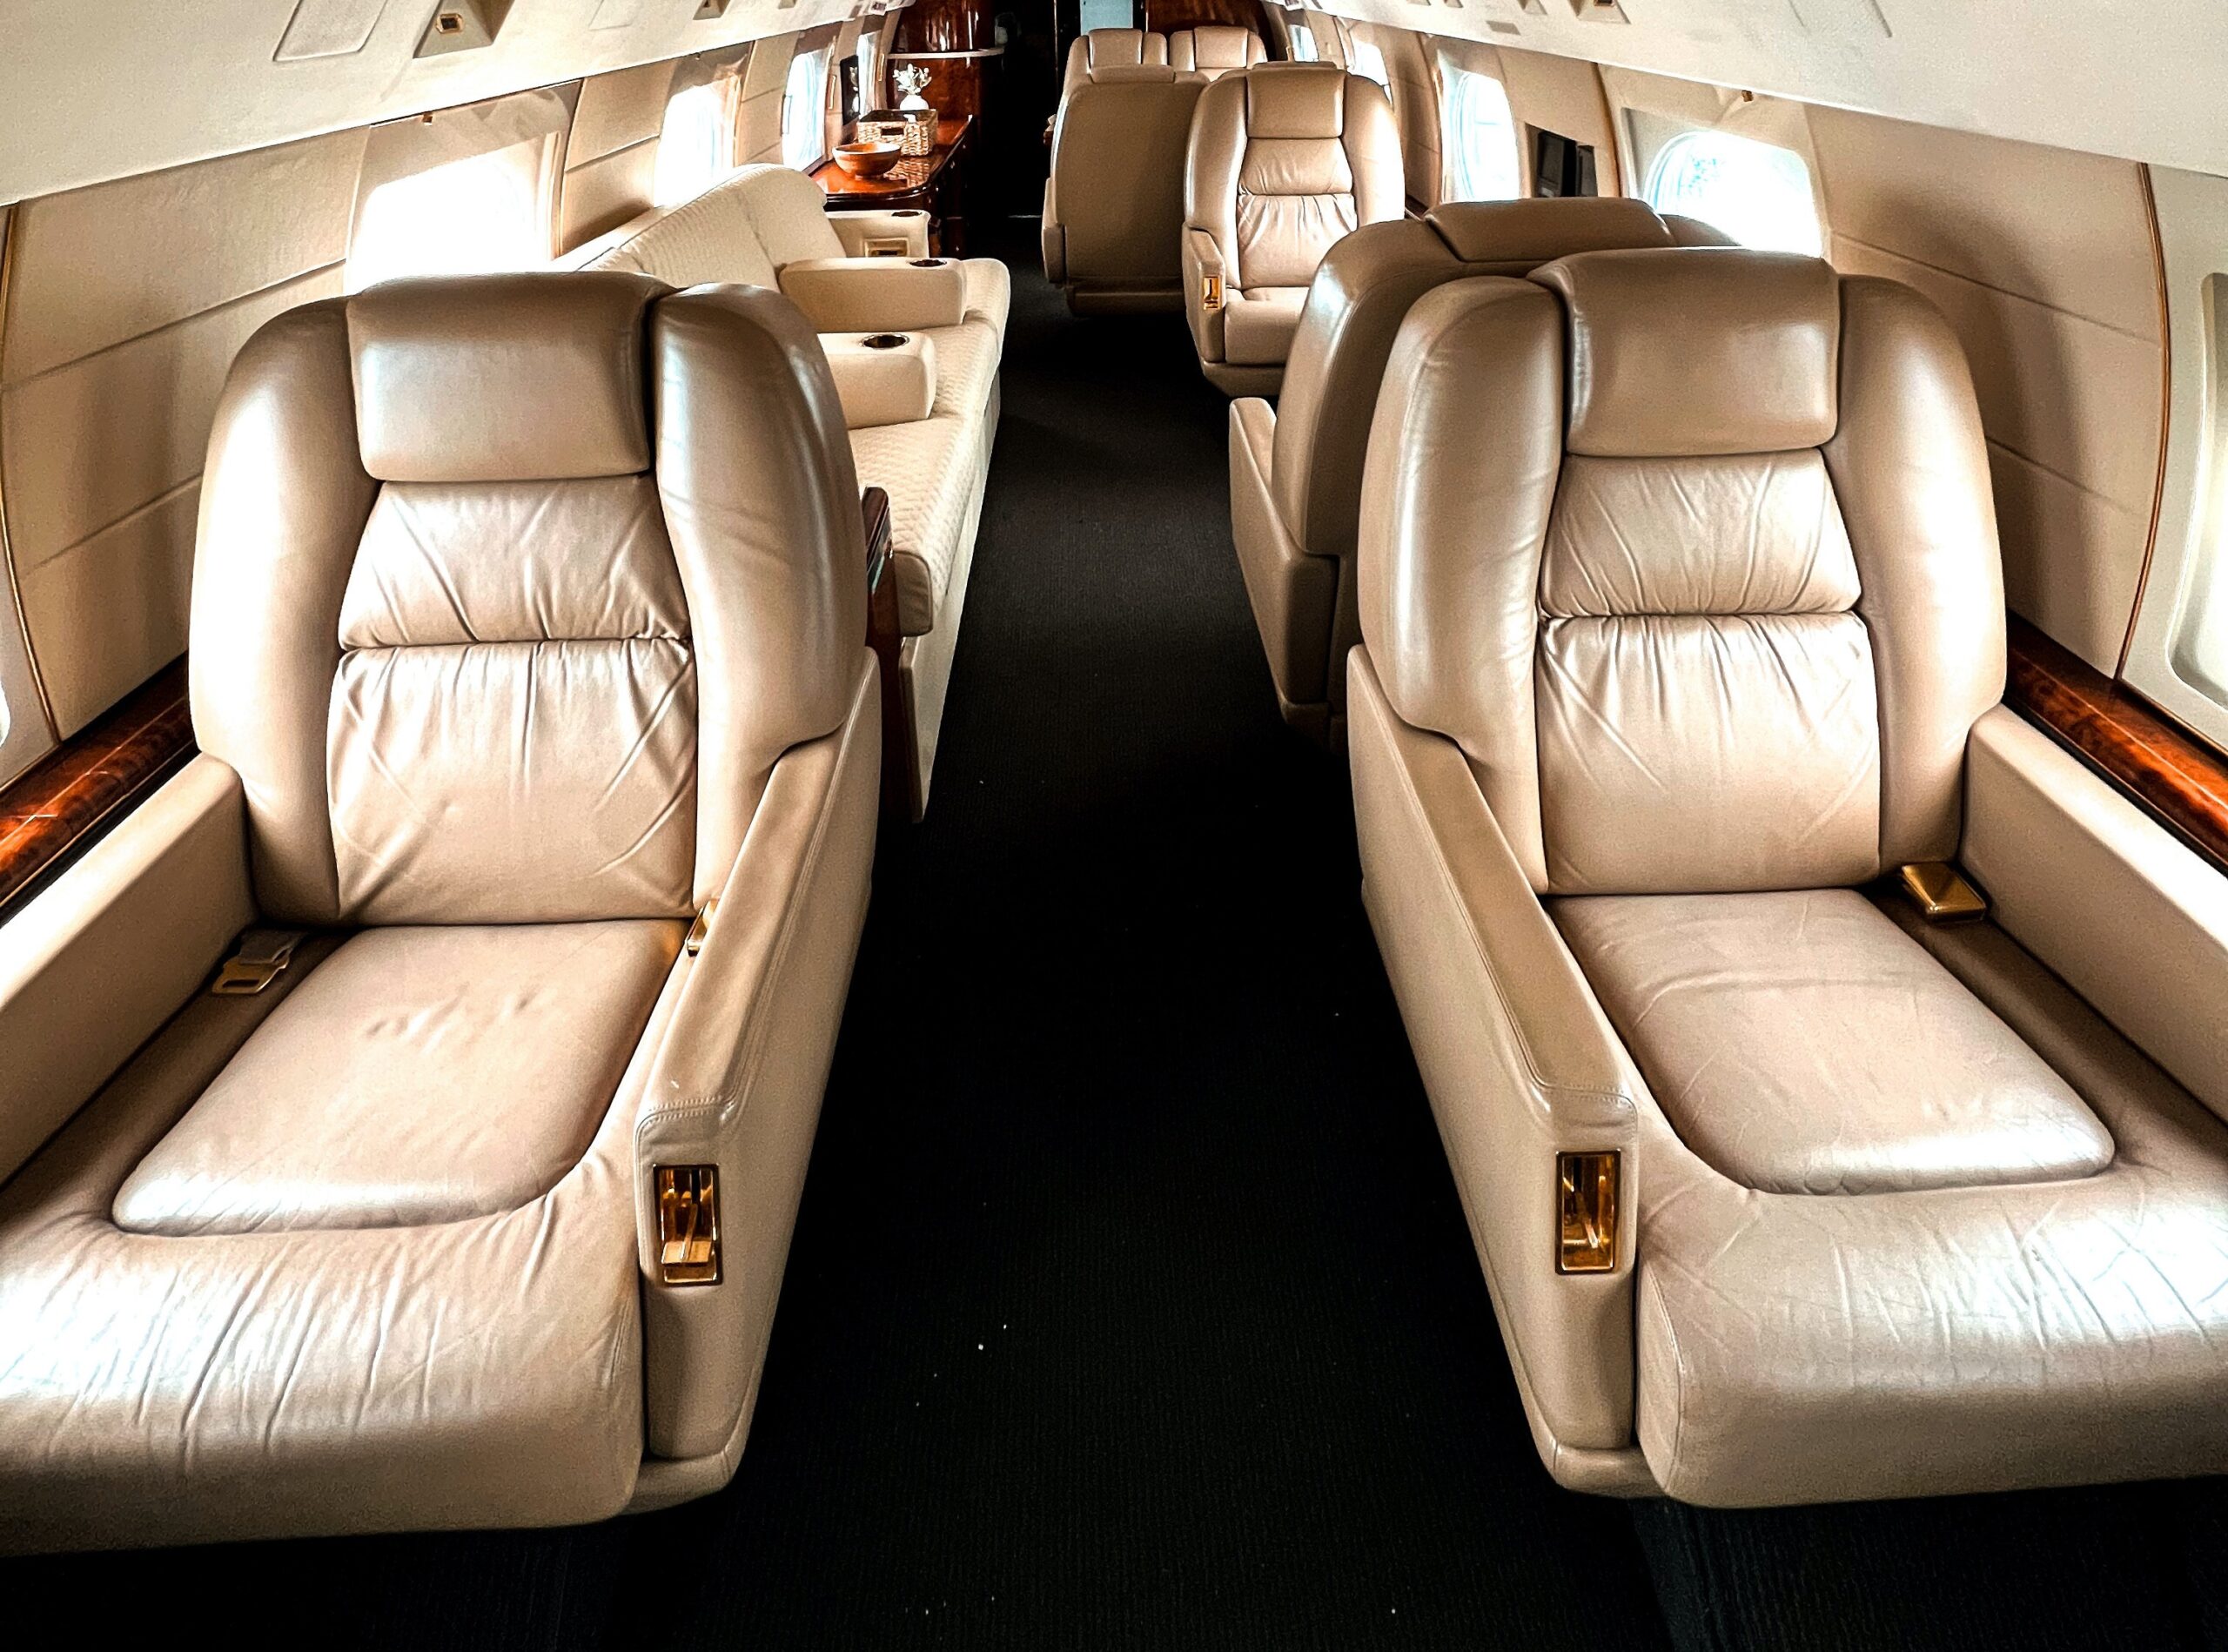 What Are the Most Lavish Private Jet Interiors and Designs